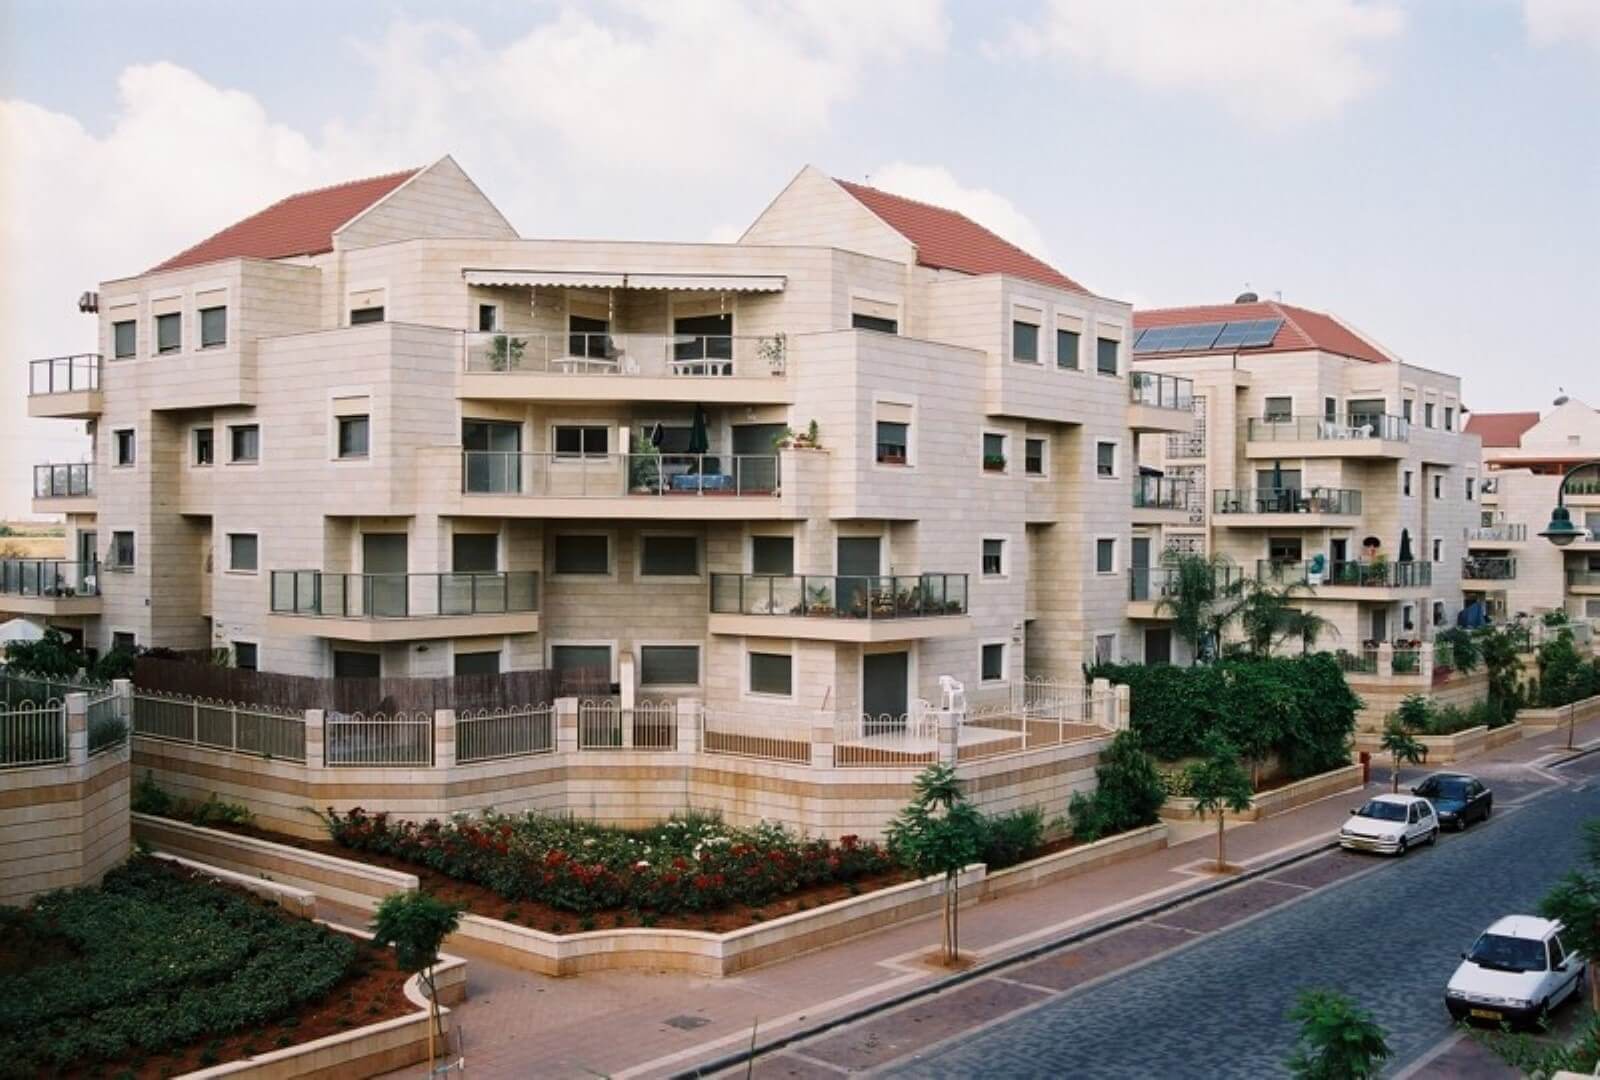 Photo of buildings from the Rishon Lezion Dream project